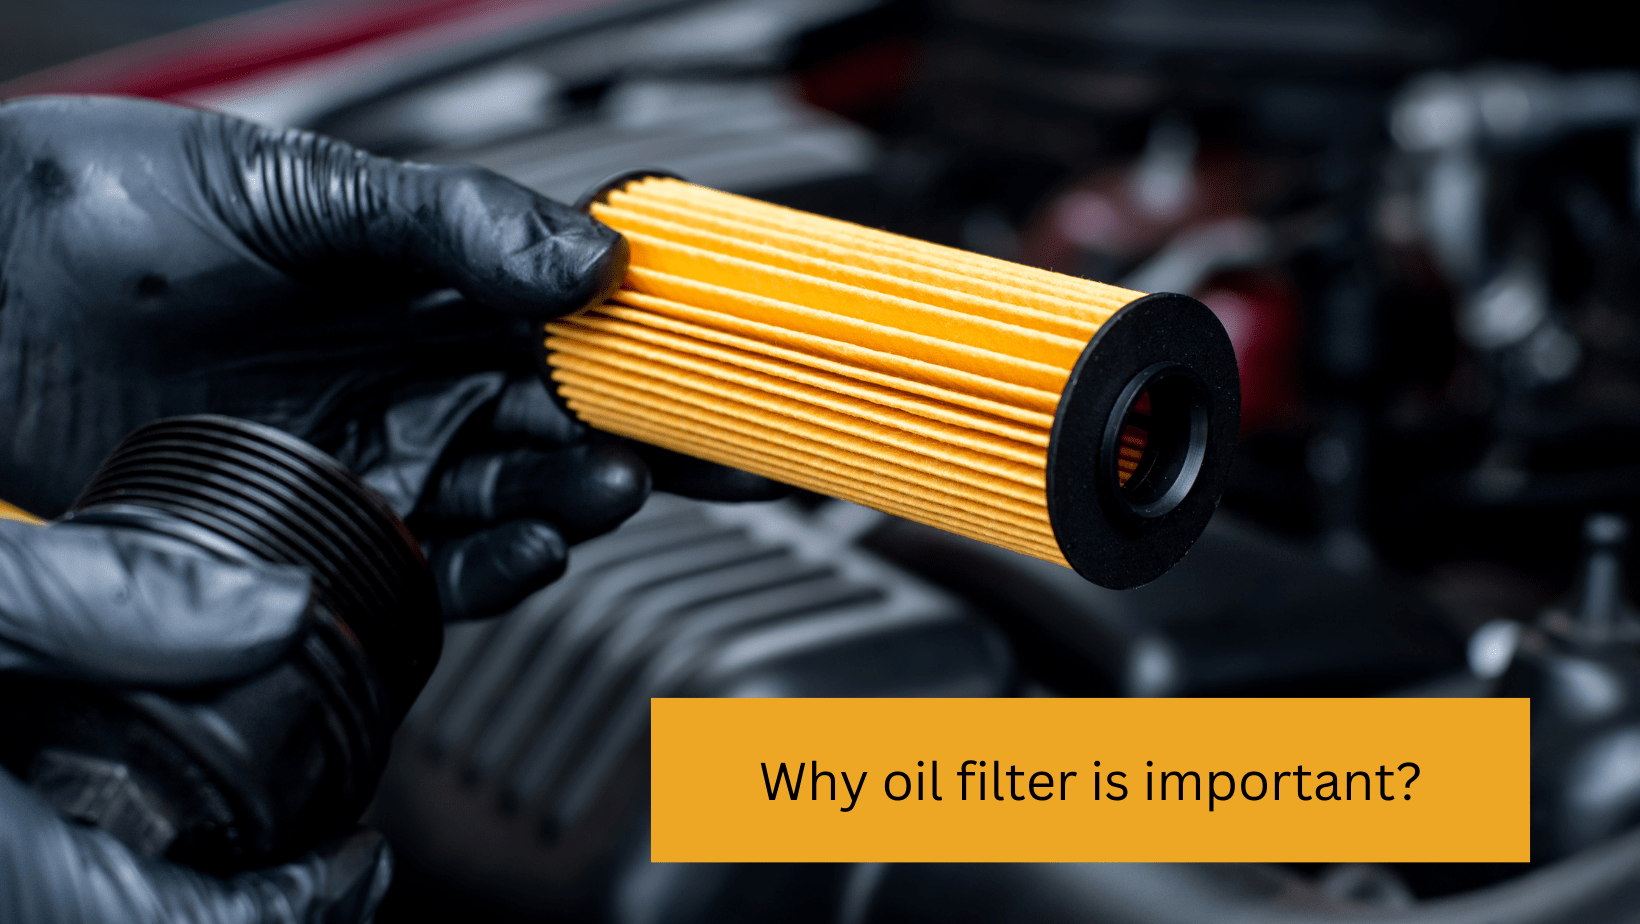 Oil filter importance